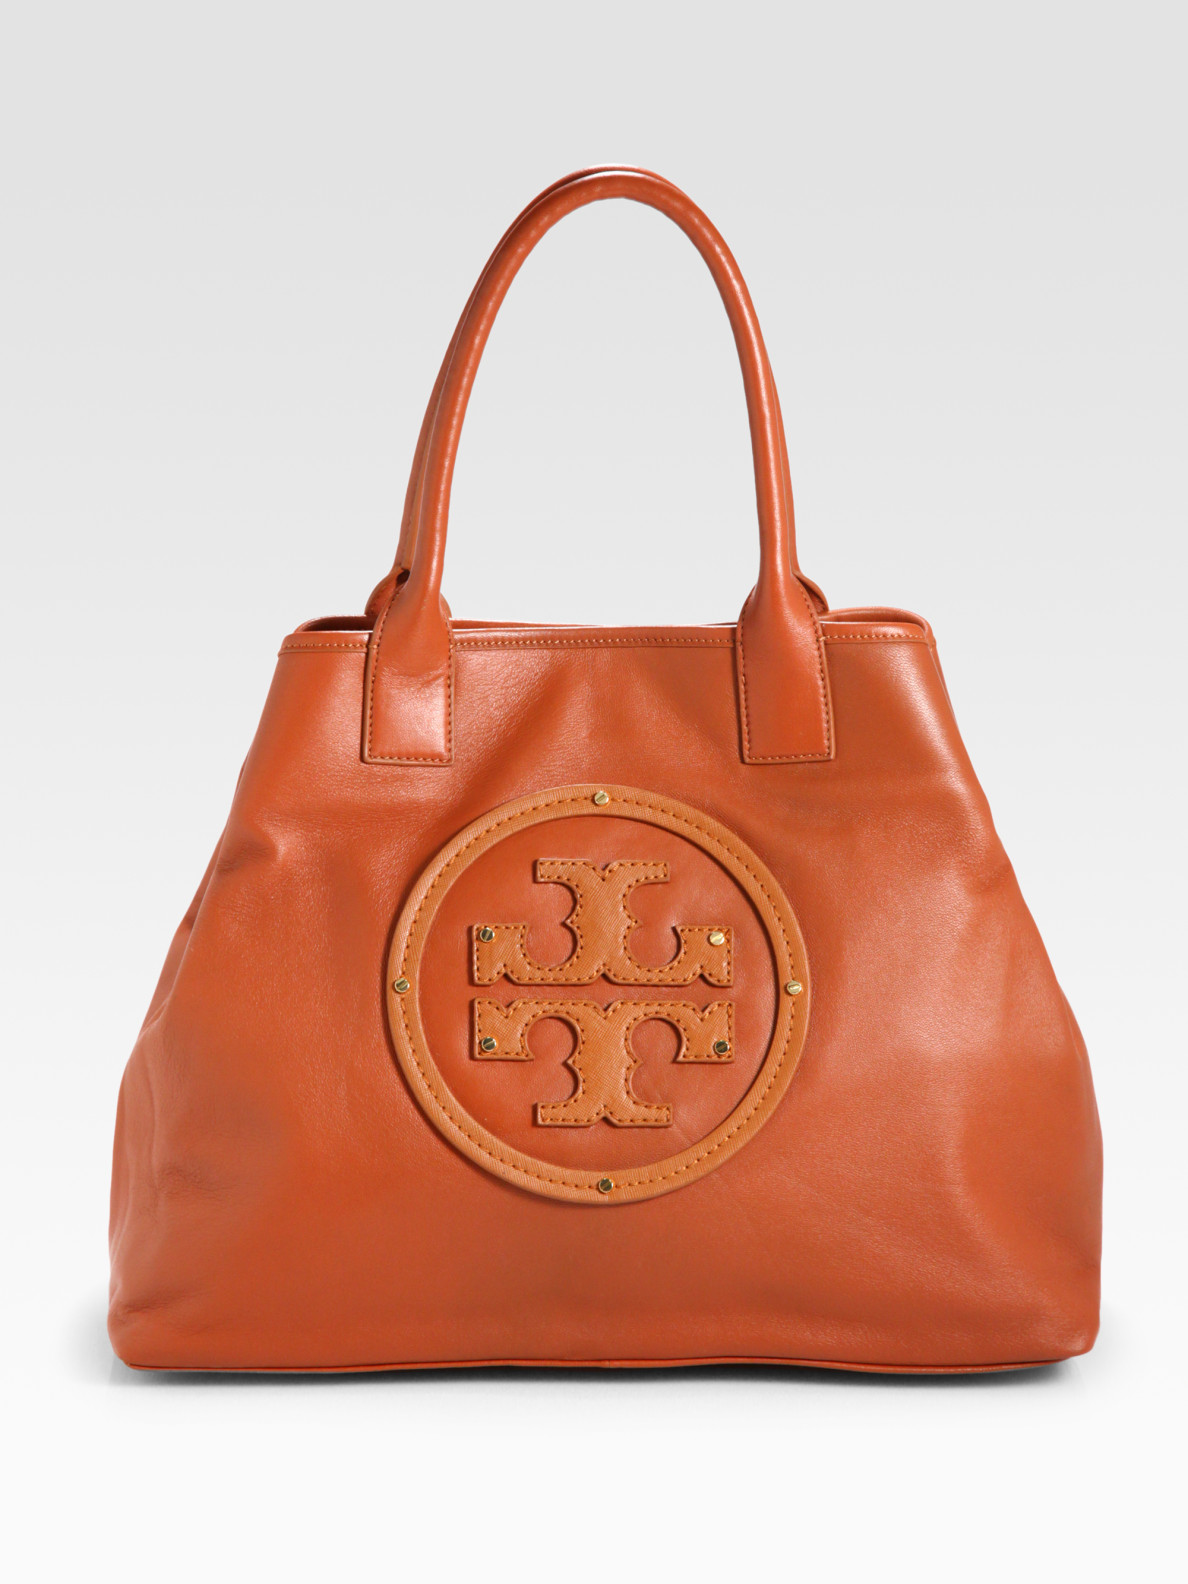 Lyst - Tory Burch Stacked Logo Summer Tote Bag in Brown